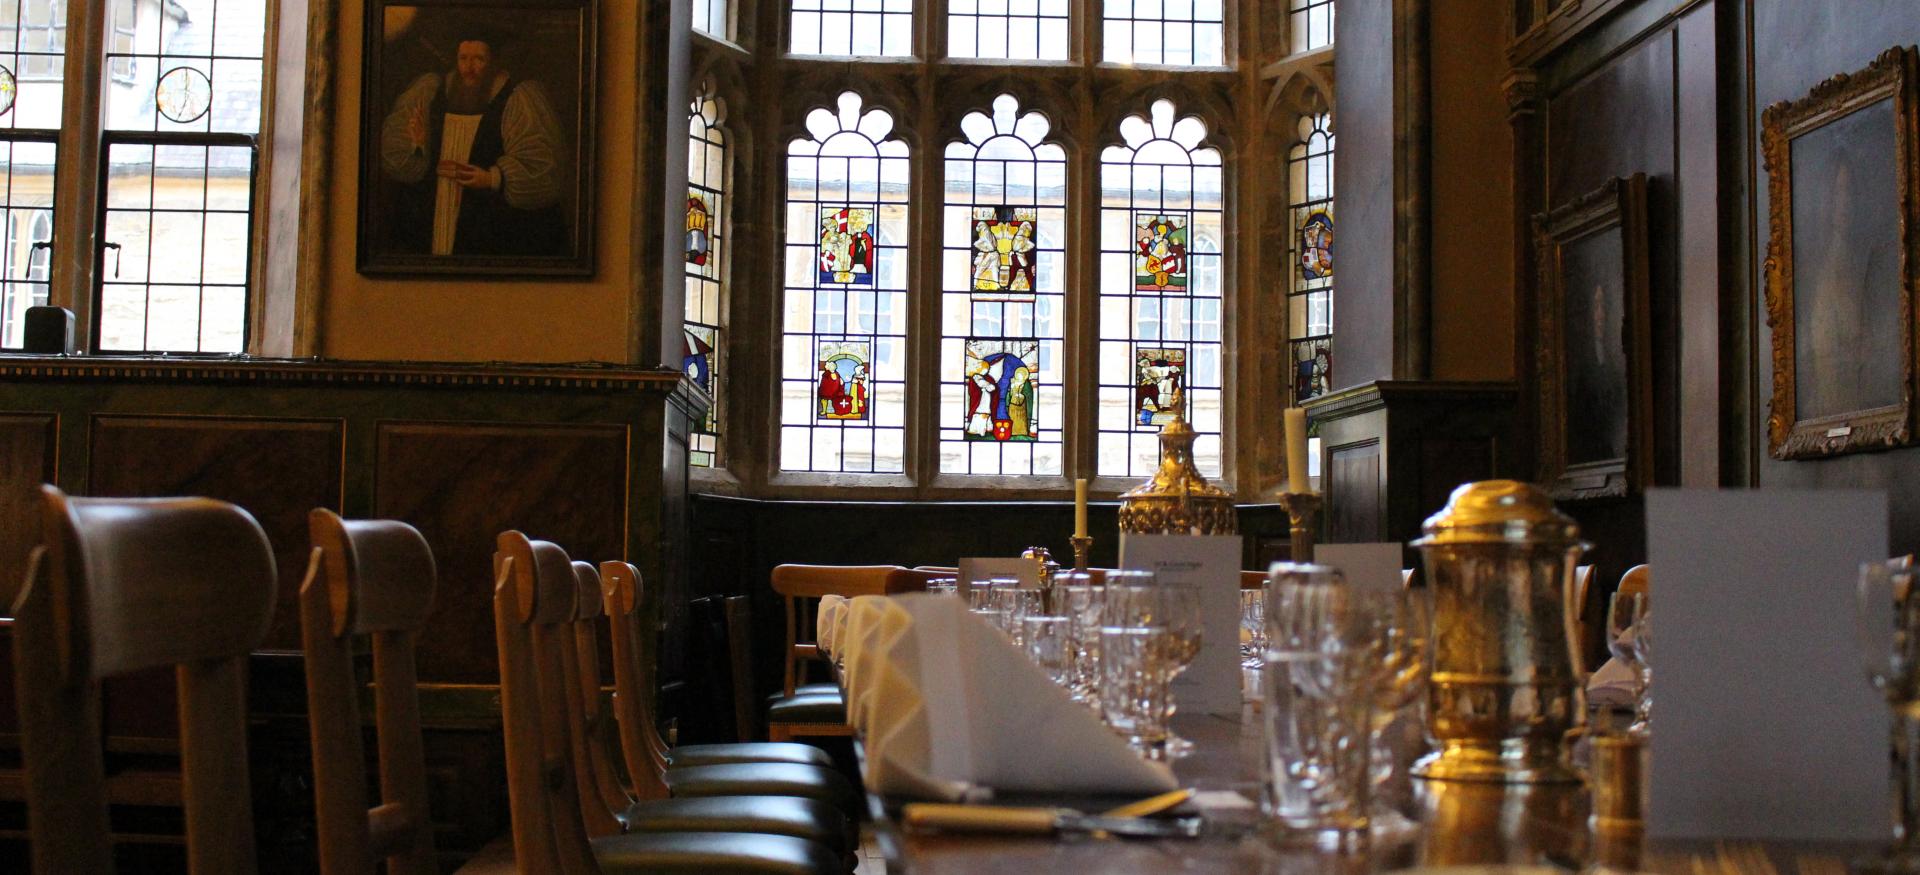 Trinity dining hall set for dinner with stained glass windows in background